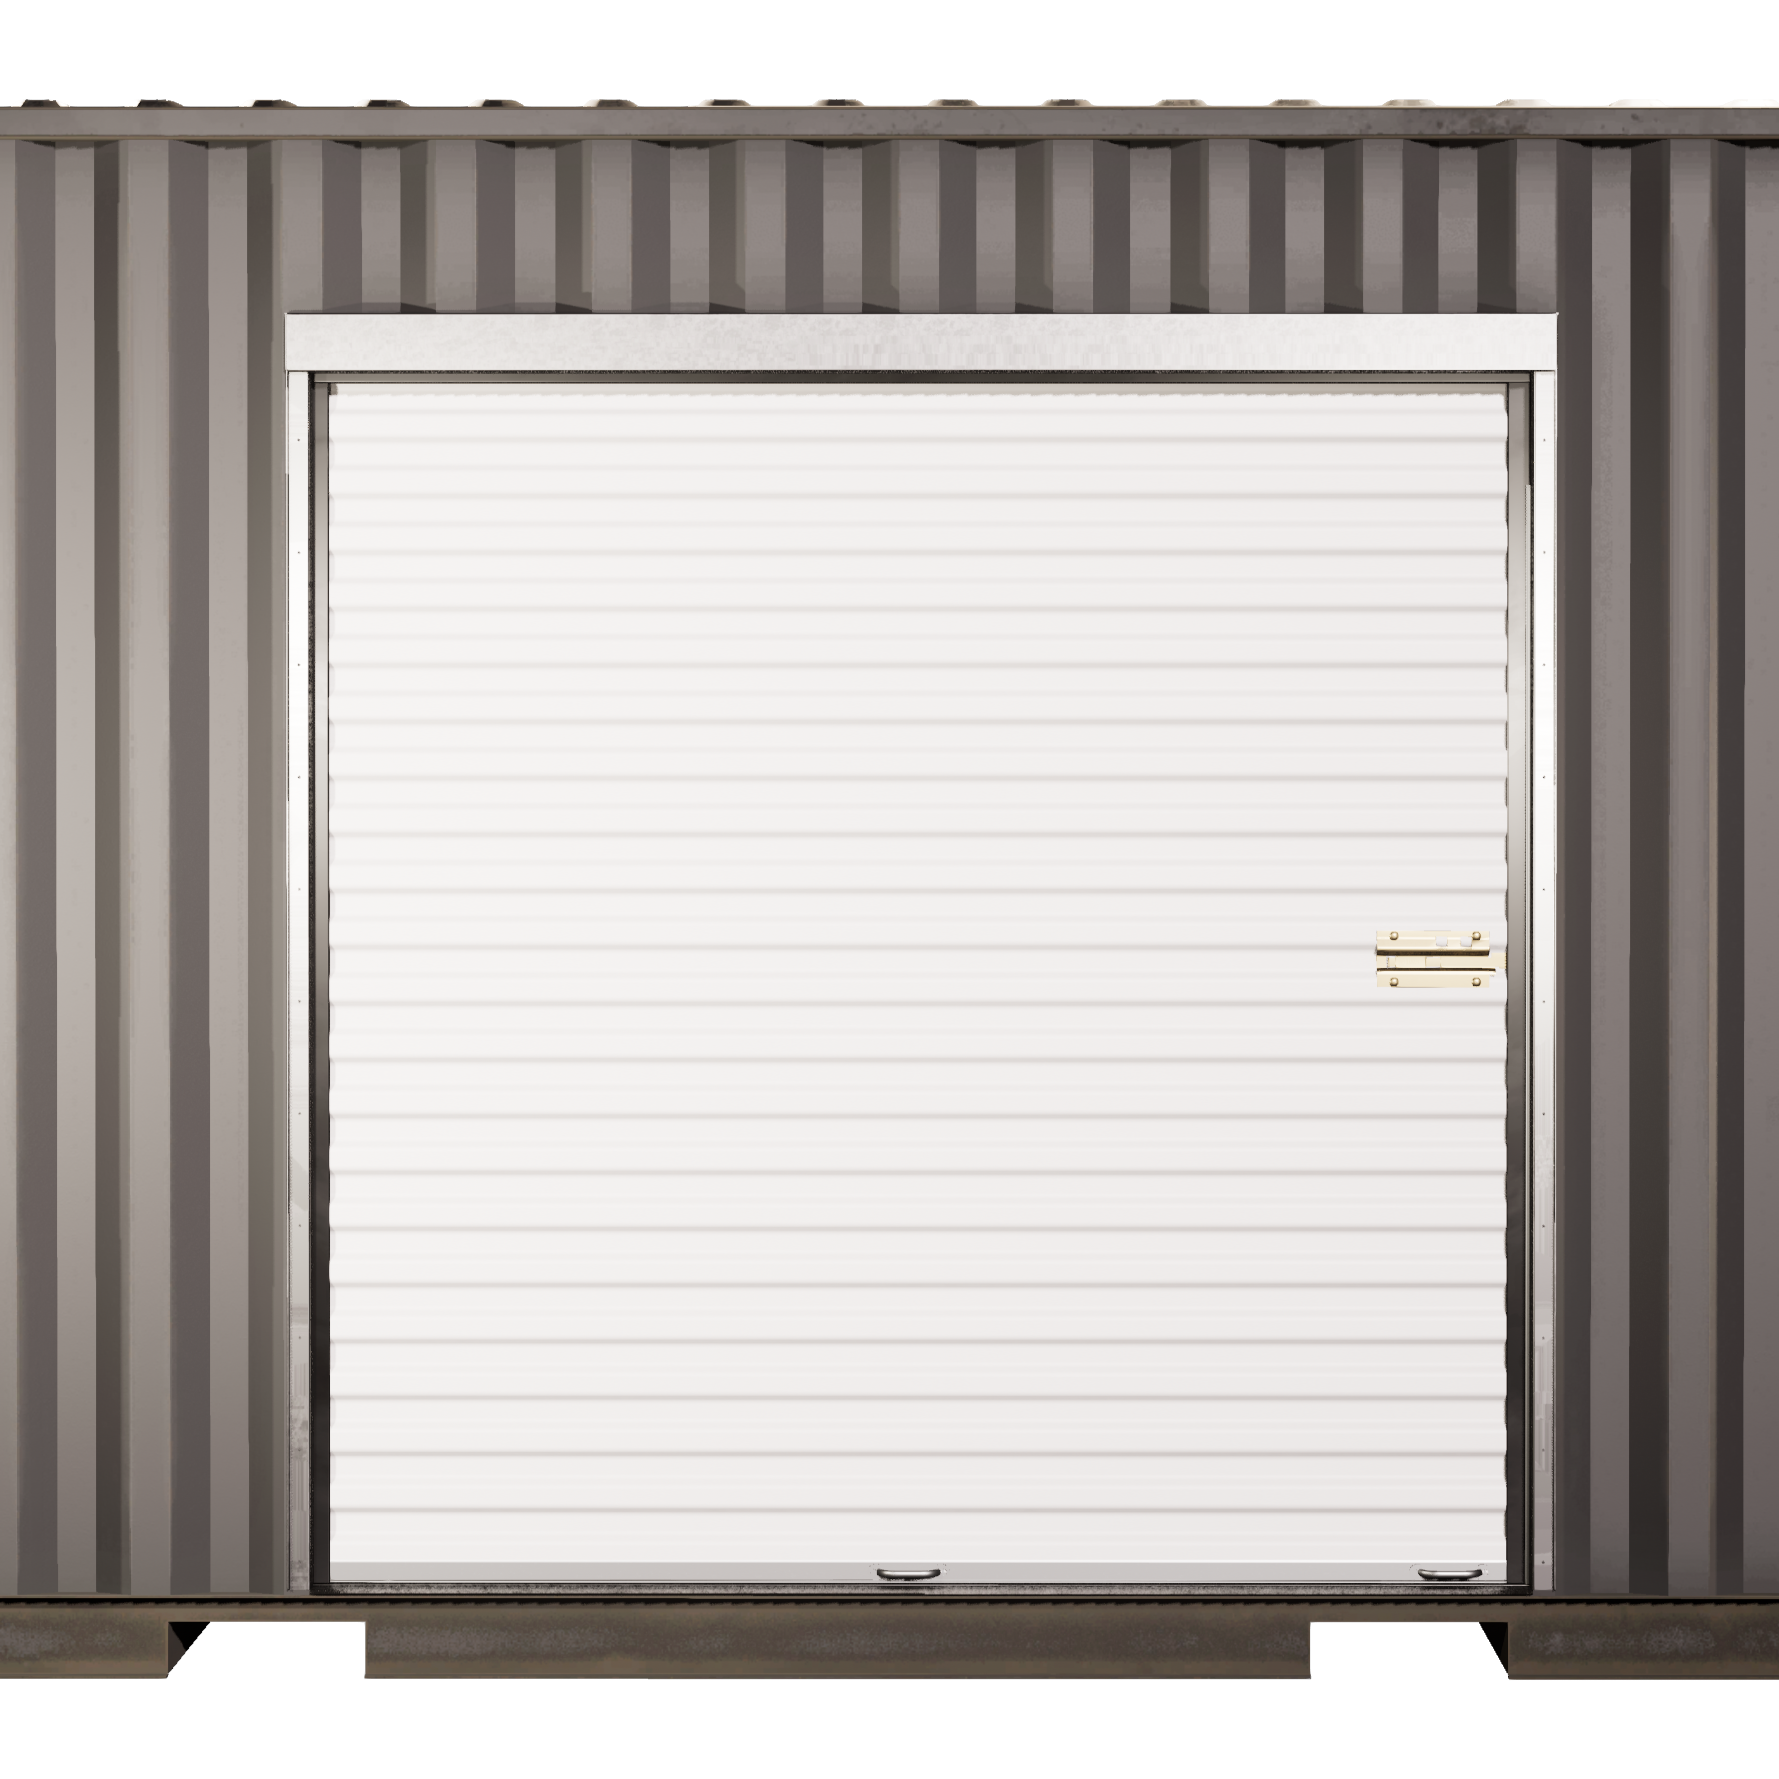 High Cube (9'6" Tall) Side Wall Roll Up Door Framing Kits - Door Not Included (Please contact us before placing order so we can provide accurate shipping quote)